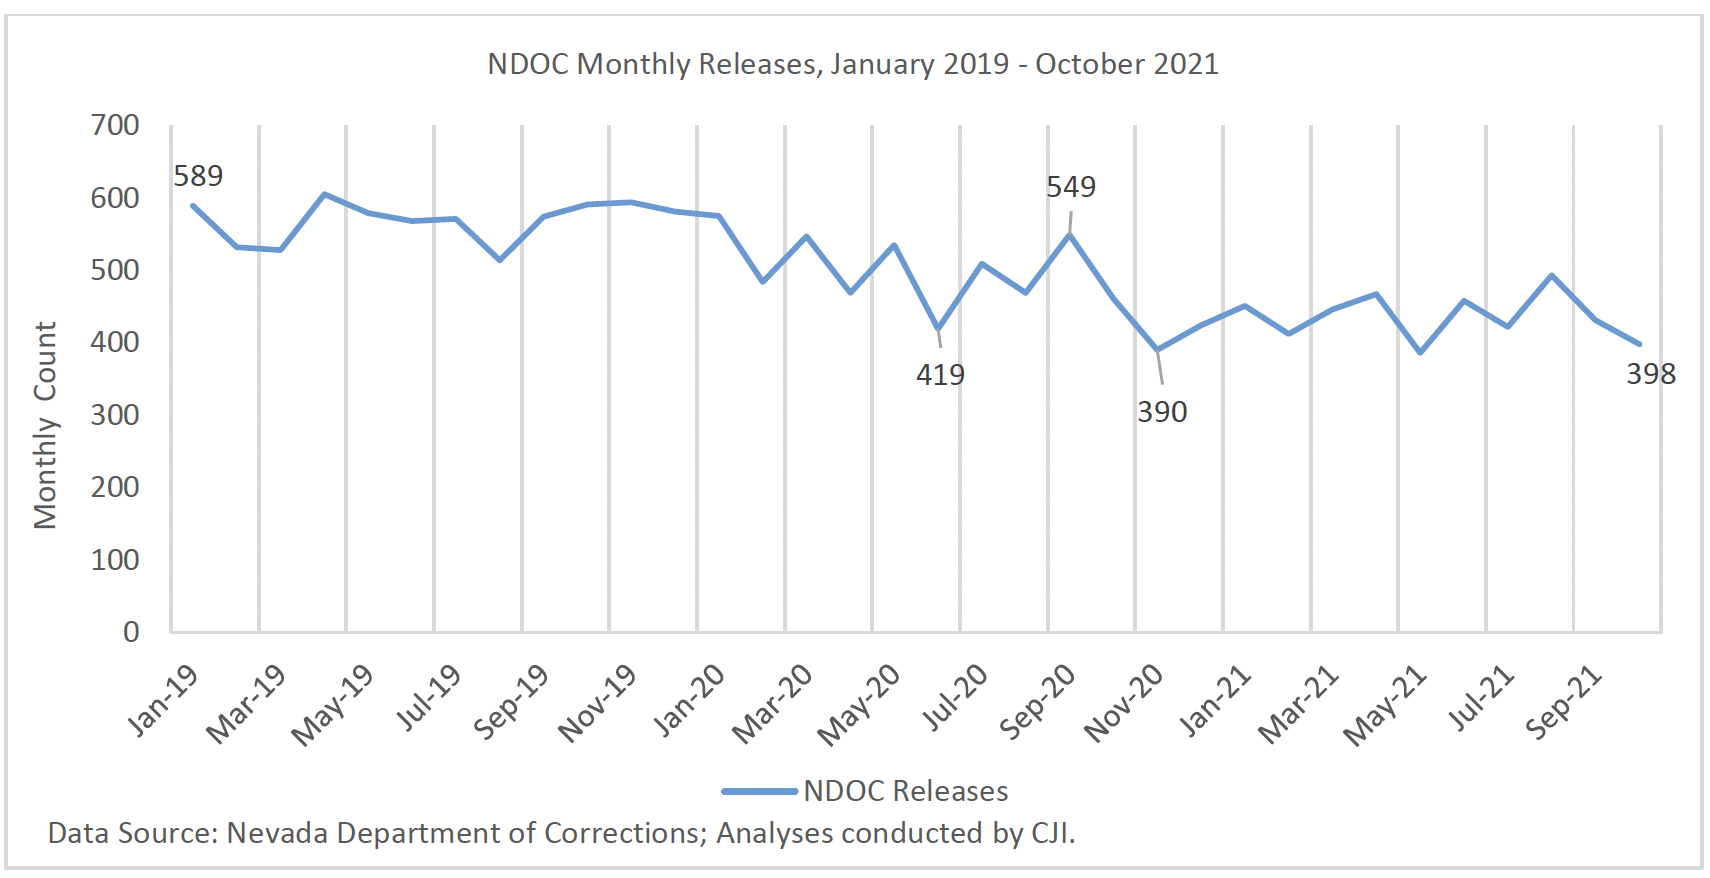 A view of NDOC average monthly releases dropped 19 percent compared to before COVID-19 